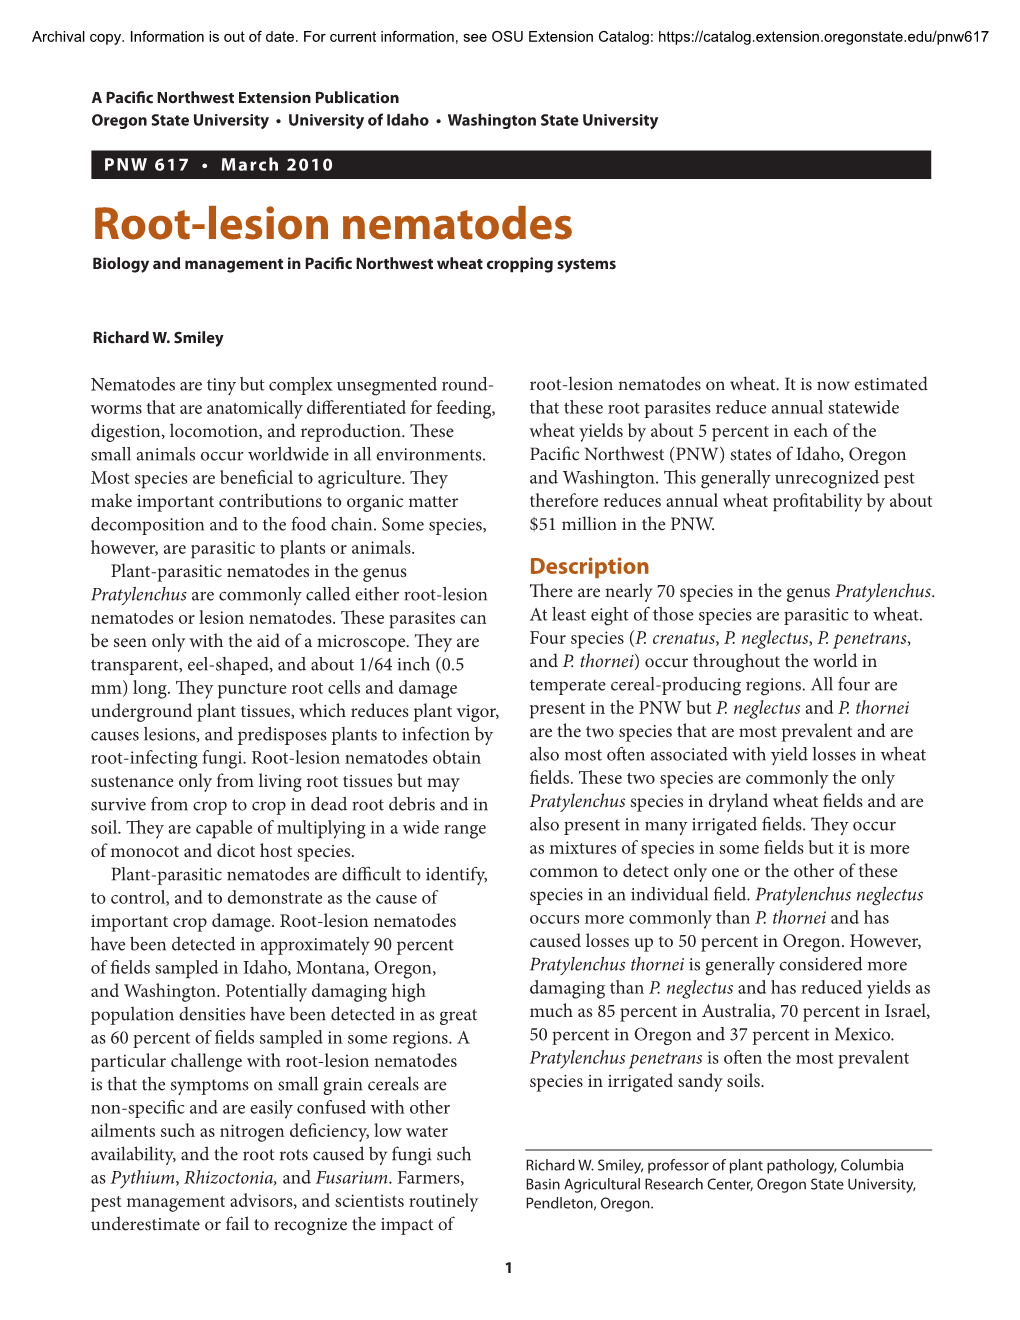 Root-Lesion Nematodes Biology and Management in Pacific Northwest Wheat Cropping Systems